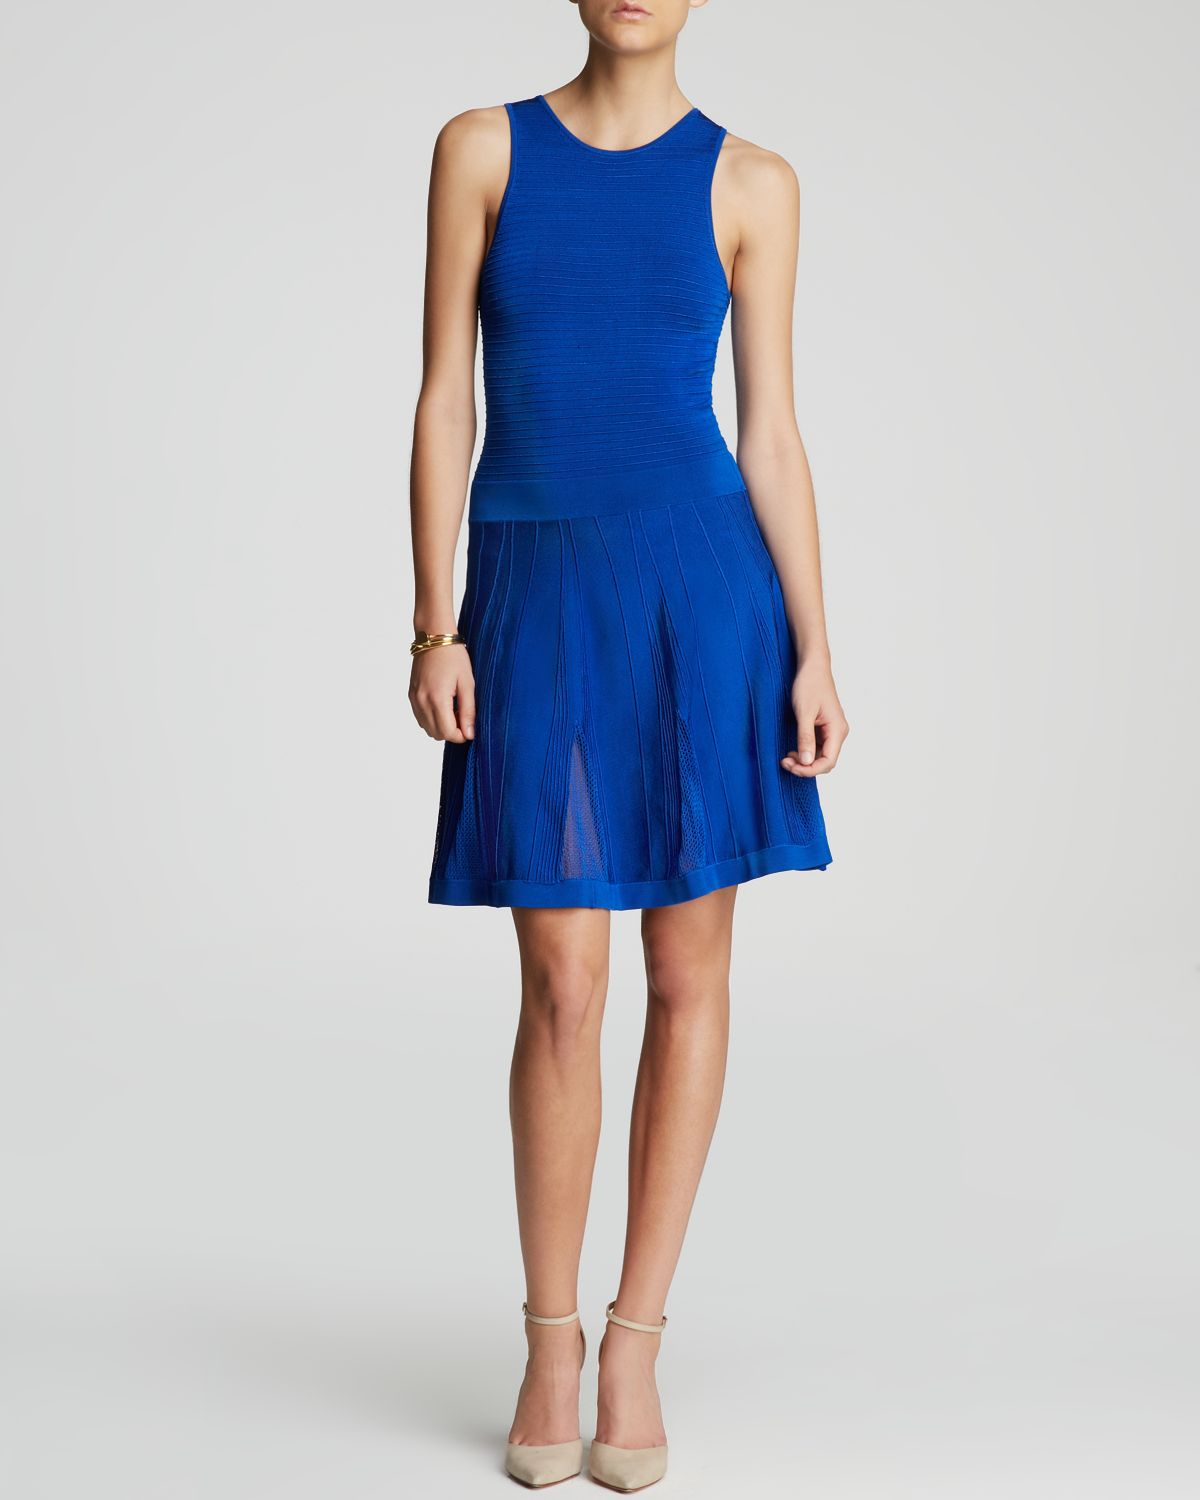 Trina Turk Dress - Fairfield Sleeveless Sweater Knit Fit And Flare in